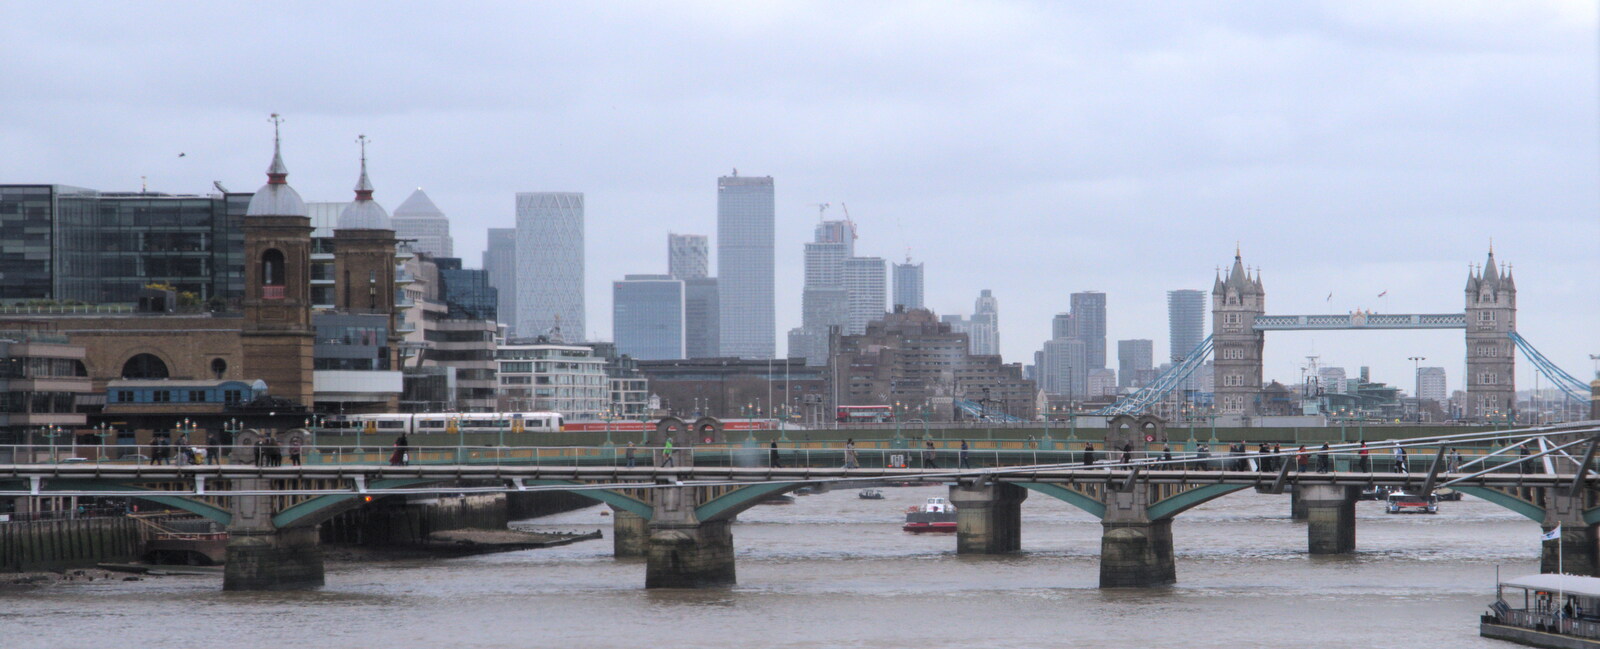 A view of London from Blackfriar station from HMS Belfast and the South Bank, Southwark, London - 17th February 2020